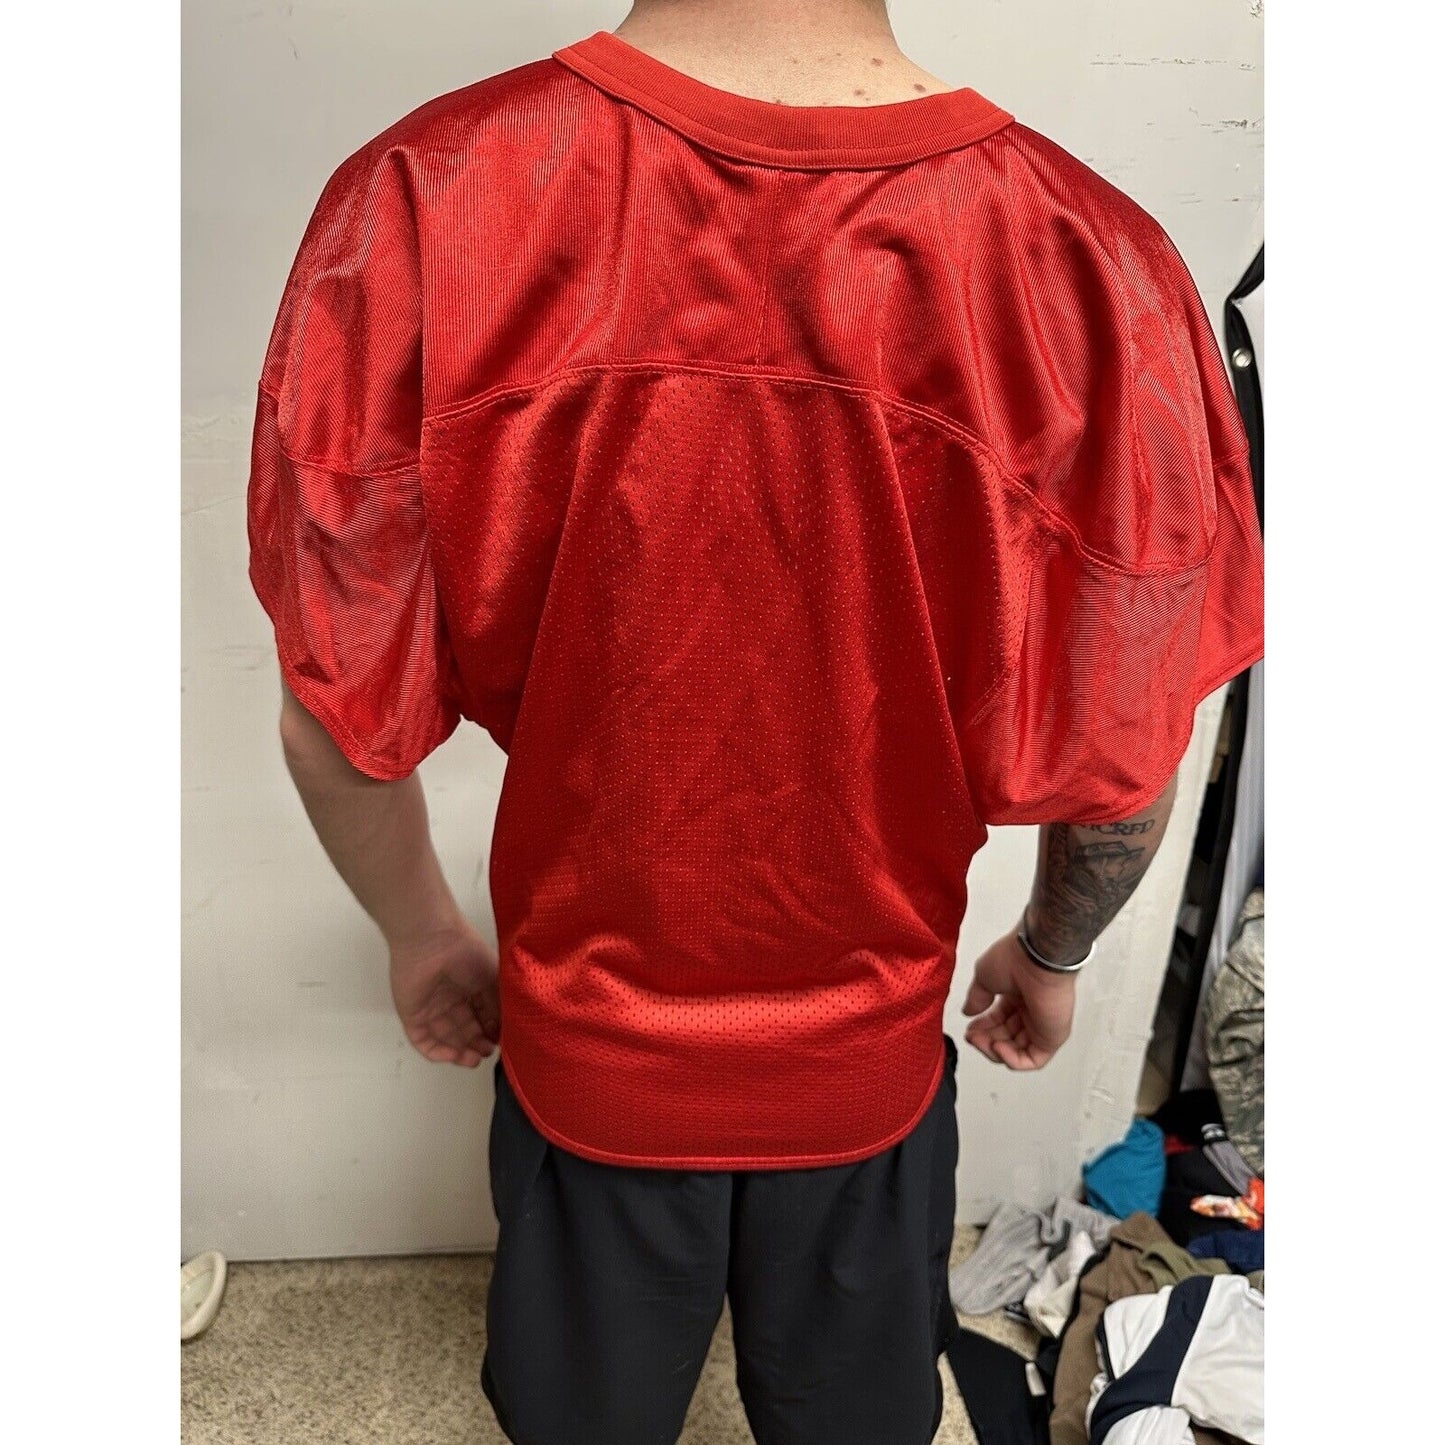 Men’s Red Nike Small Football Jersey